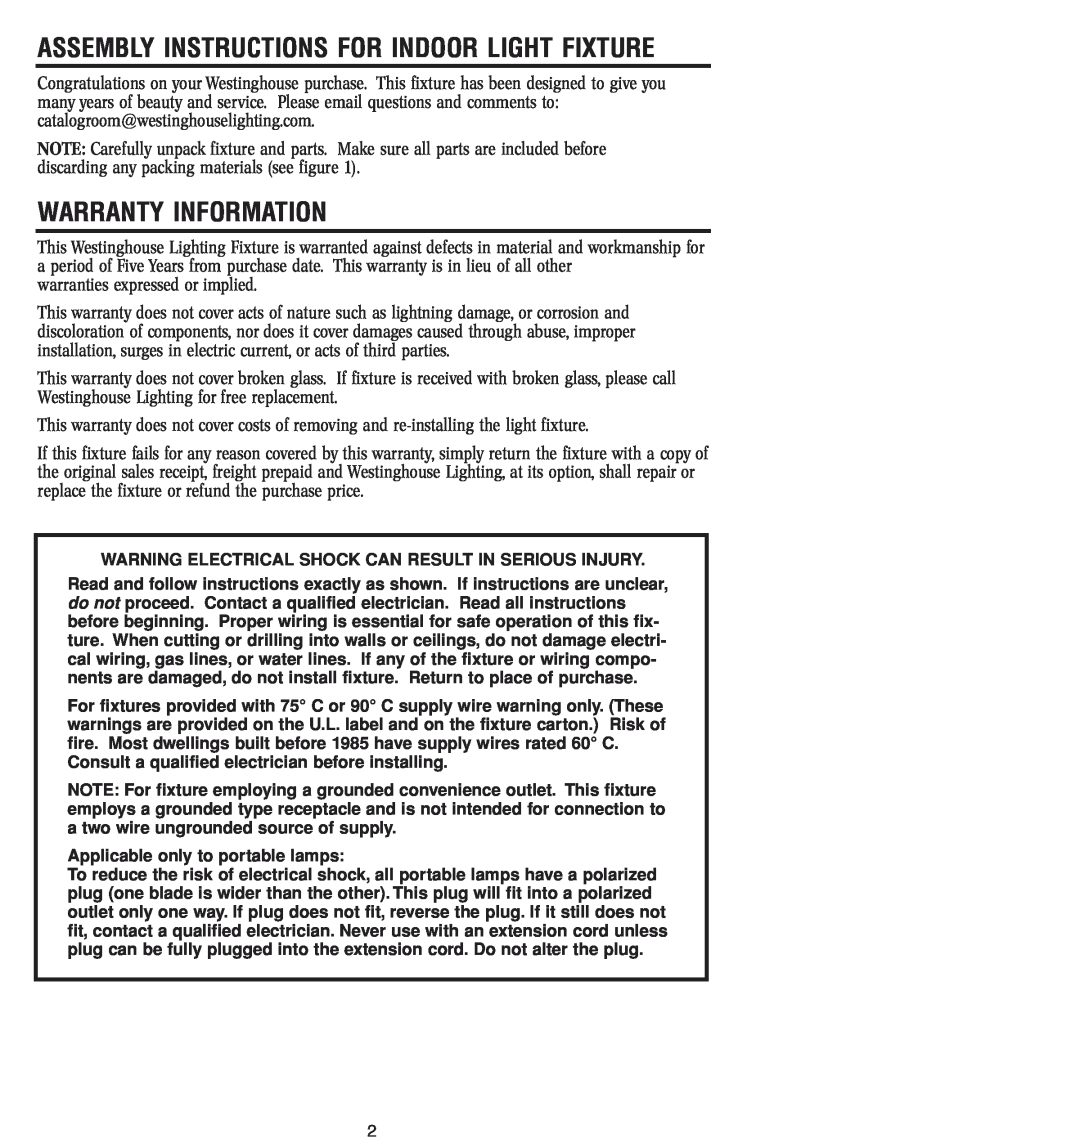 Westinghouse W-045 030404 owner manual Warranty Information, Assembly Instructions For Indoor Light Fixture 